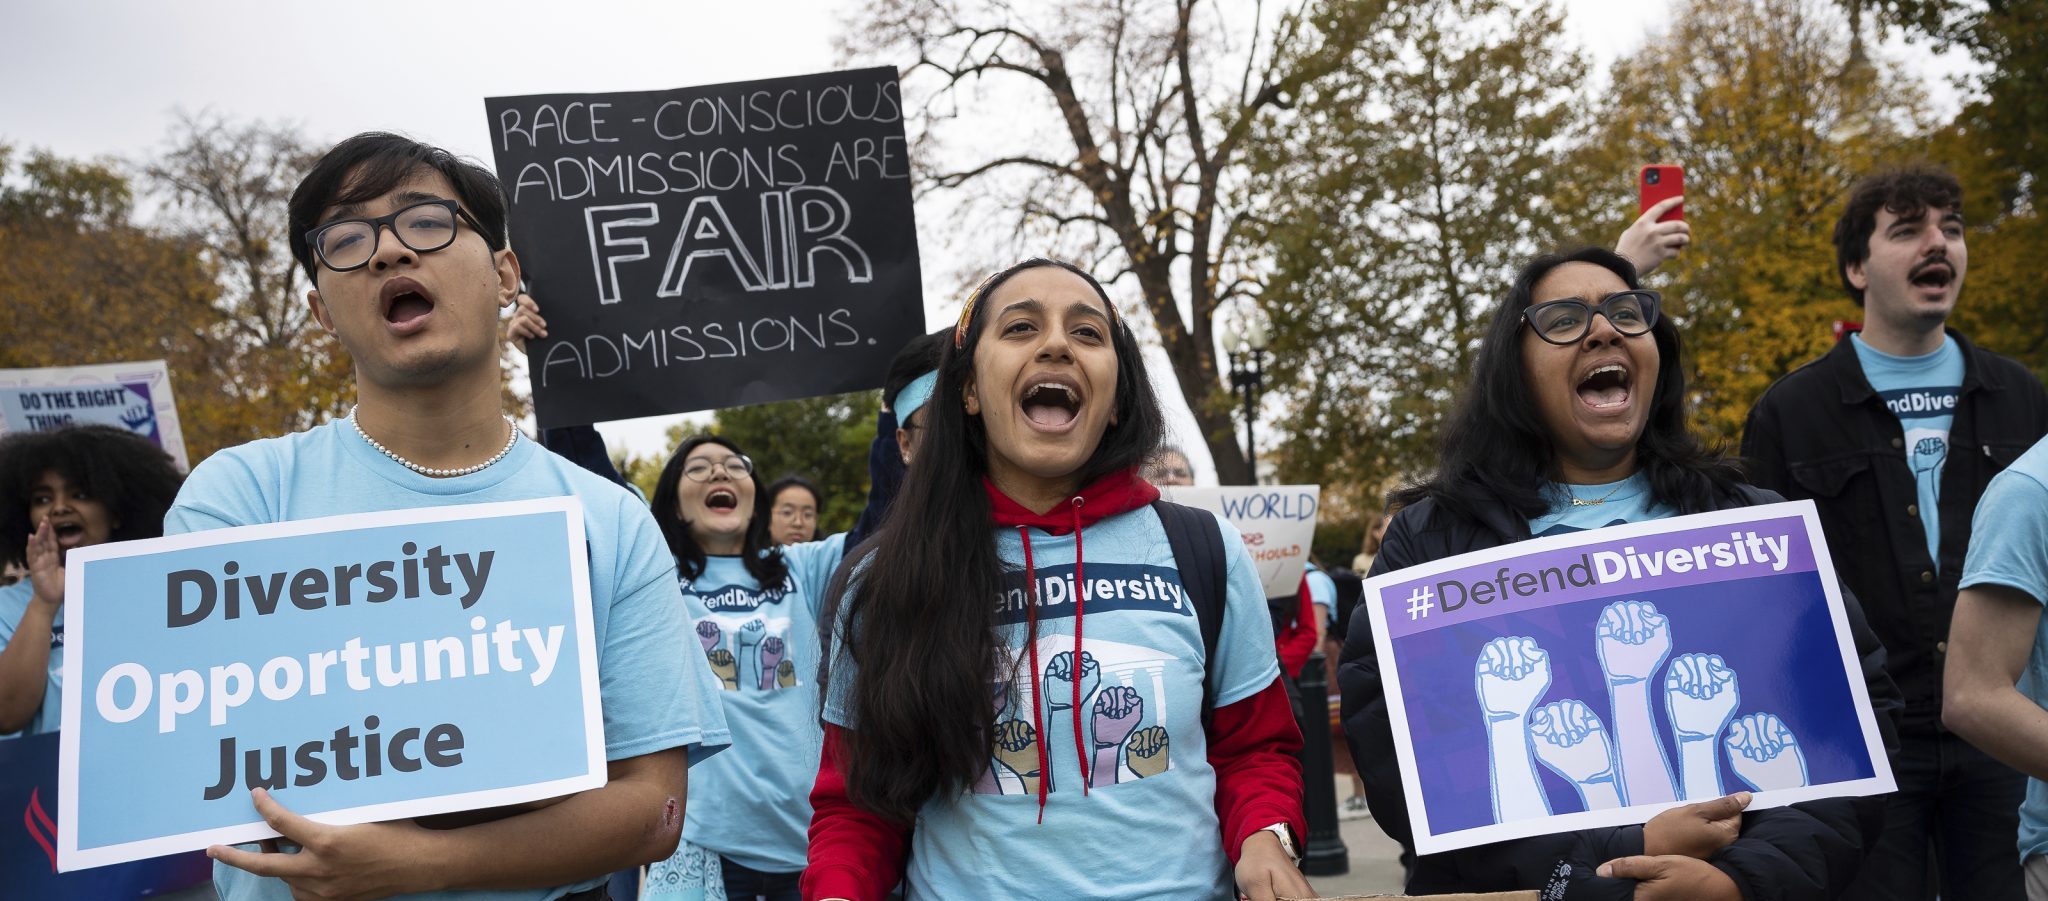 Affirmative action advocates rally outside the U.S. Supreme Court as justices heard oral arguments on two cases on whether colleges and universities can continue to consider race as a factor in admissions decisions. Credit: Francis Chung, E&E News/POLITICO via AP Images